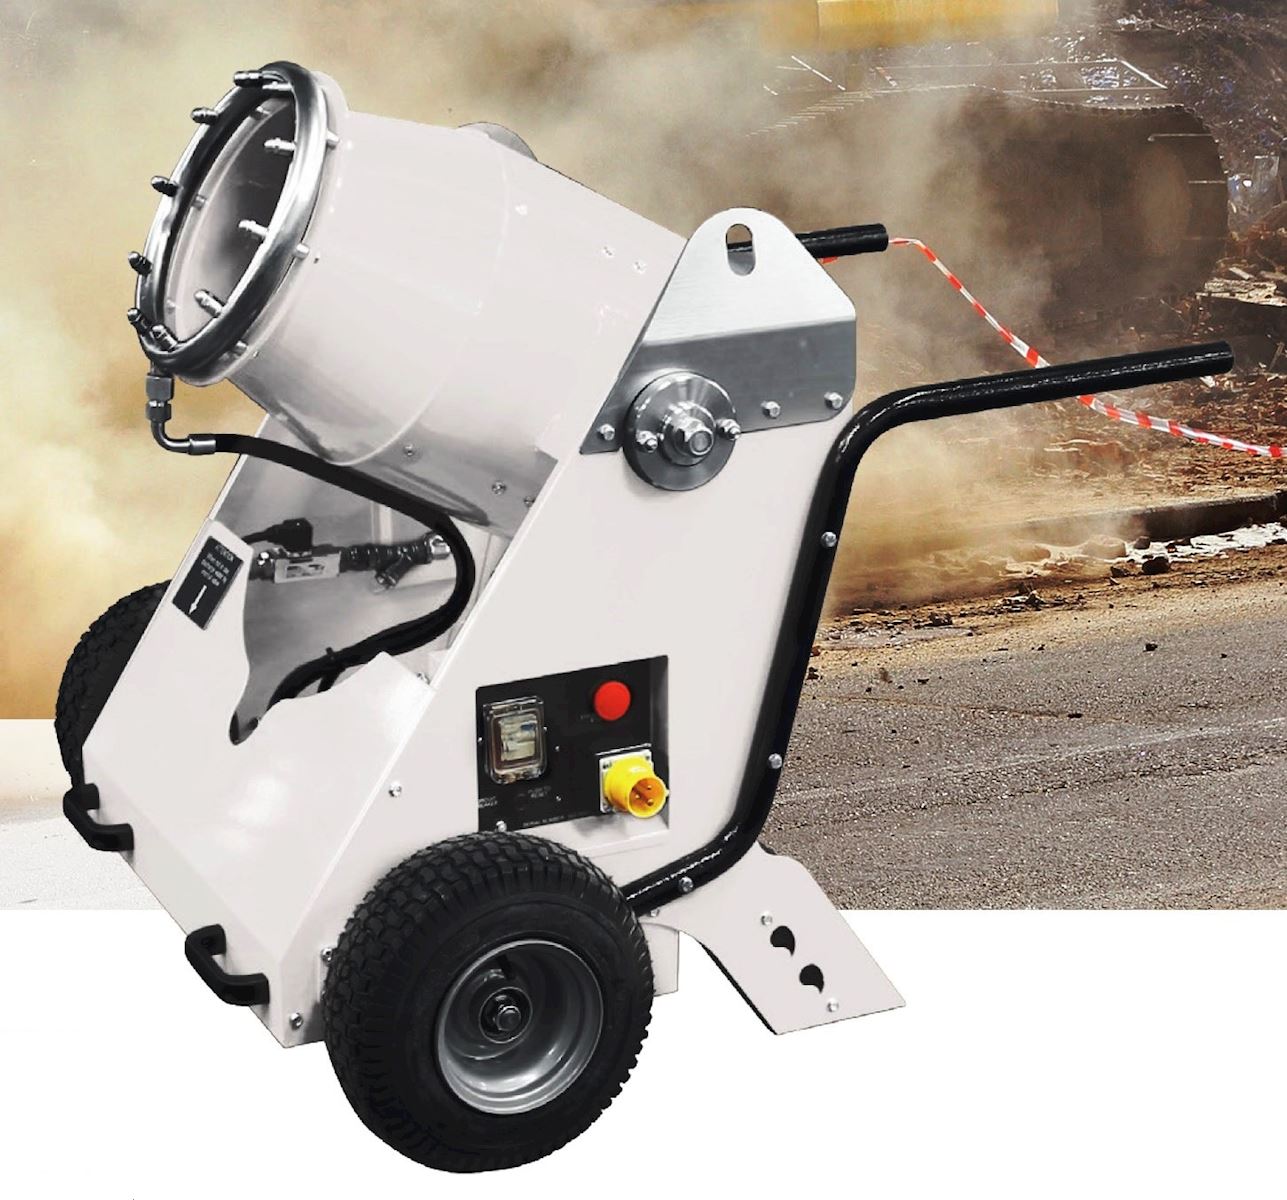 Start fighting dust the X-DUST – portable site dust suppression